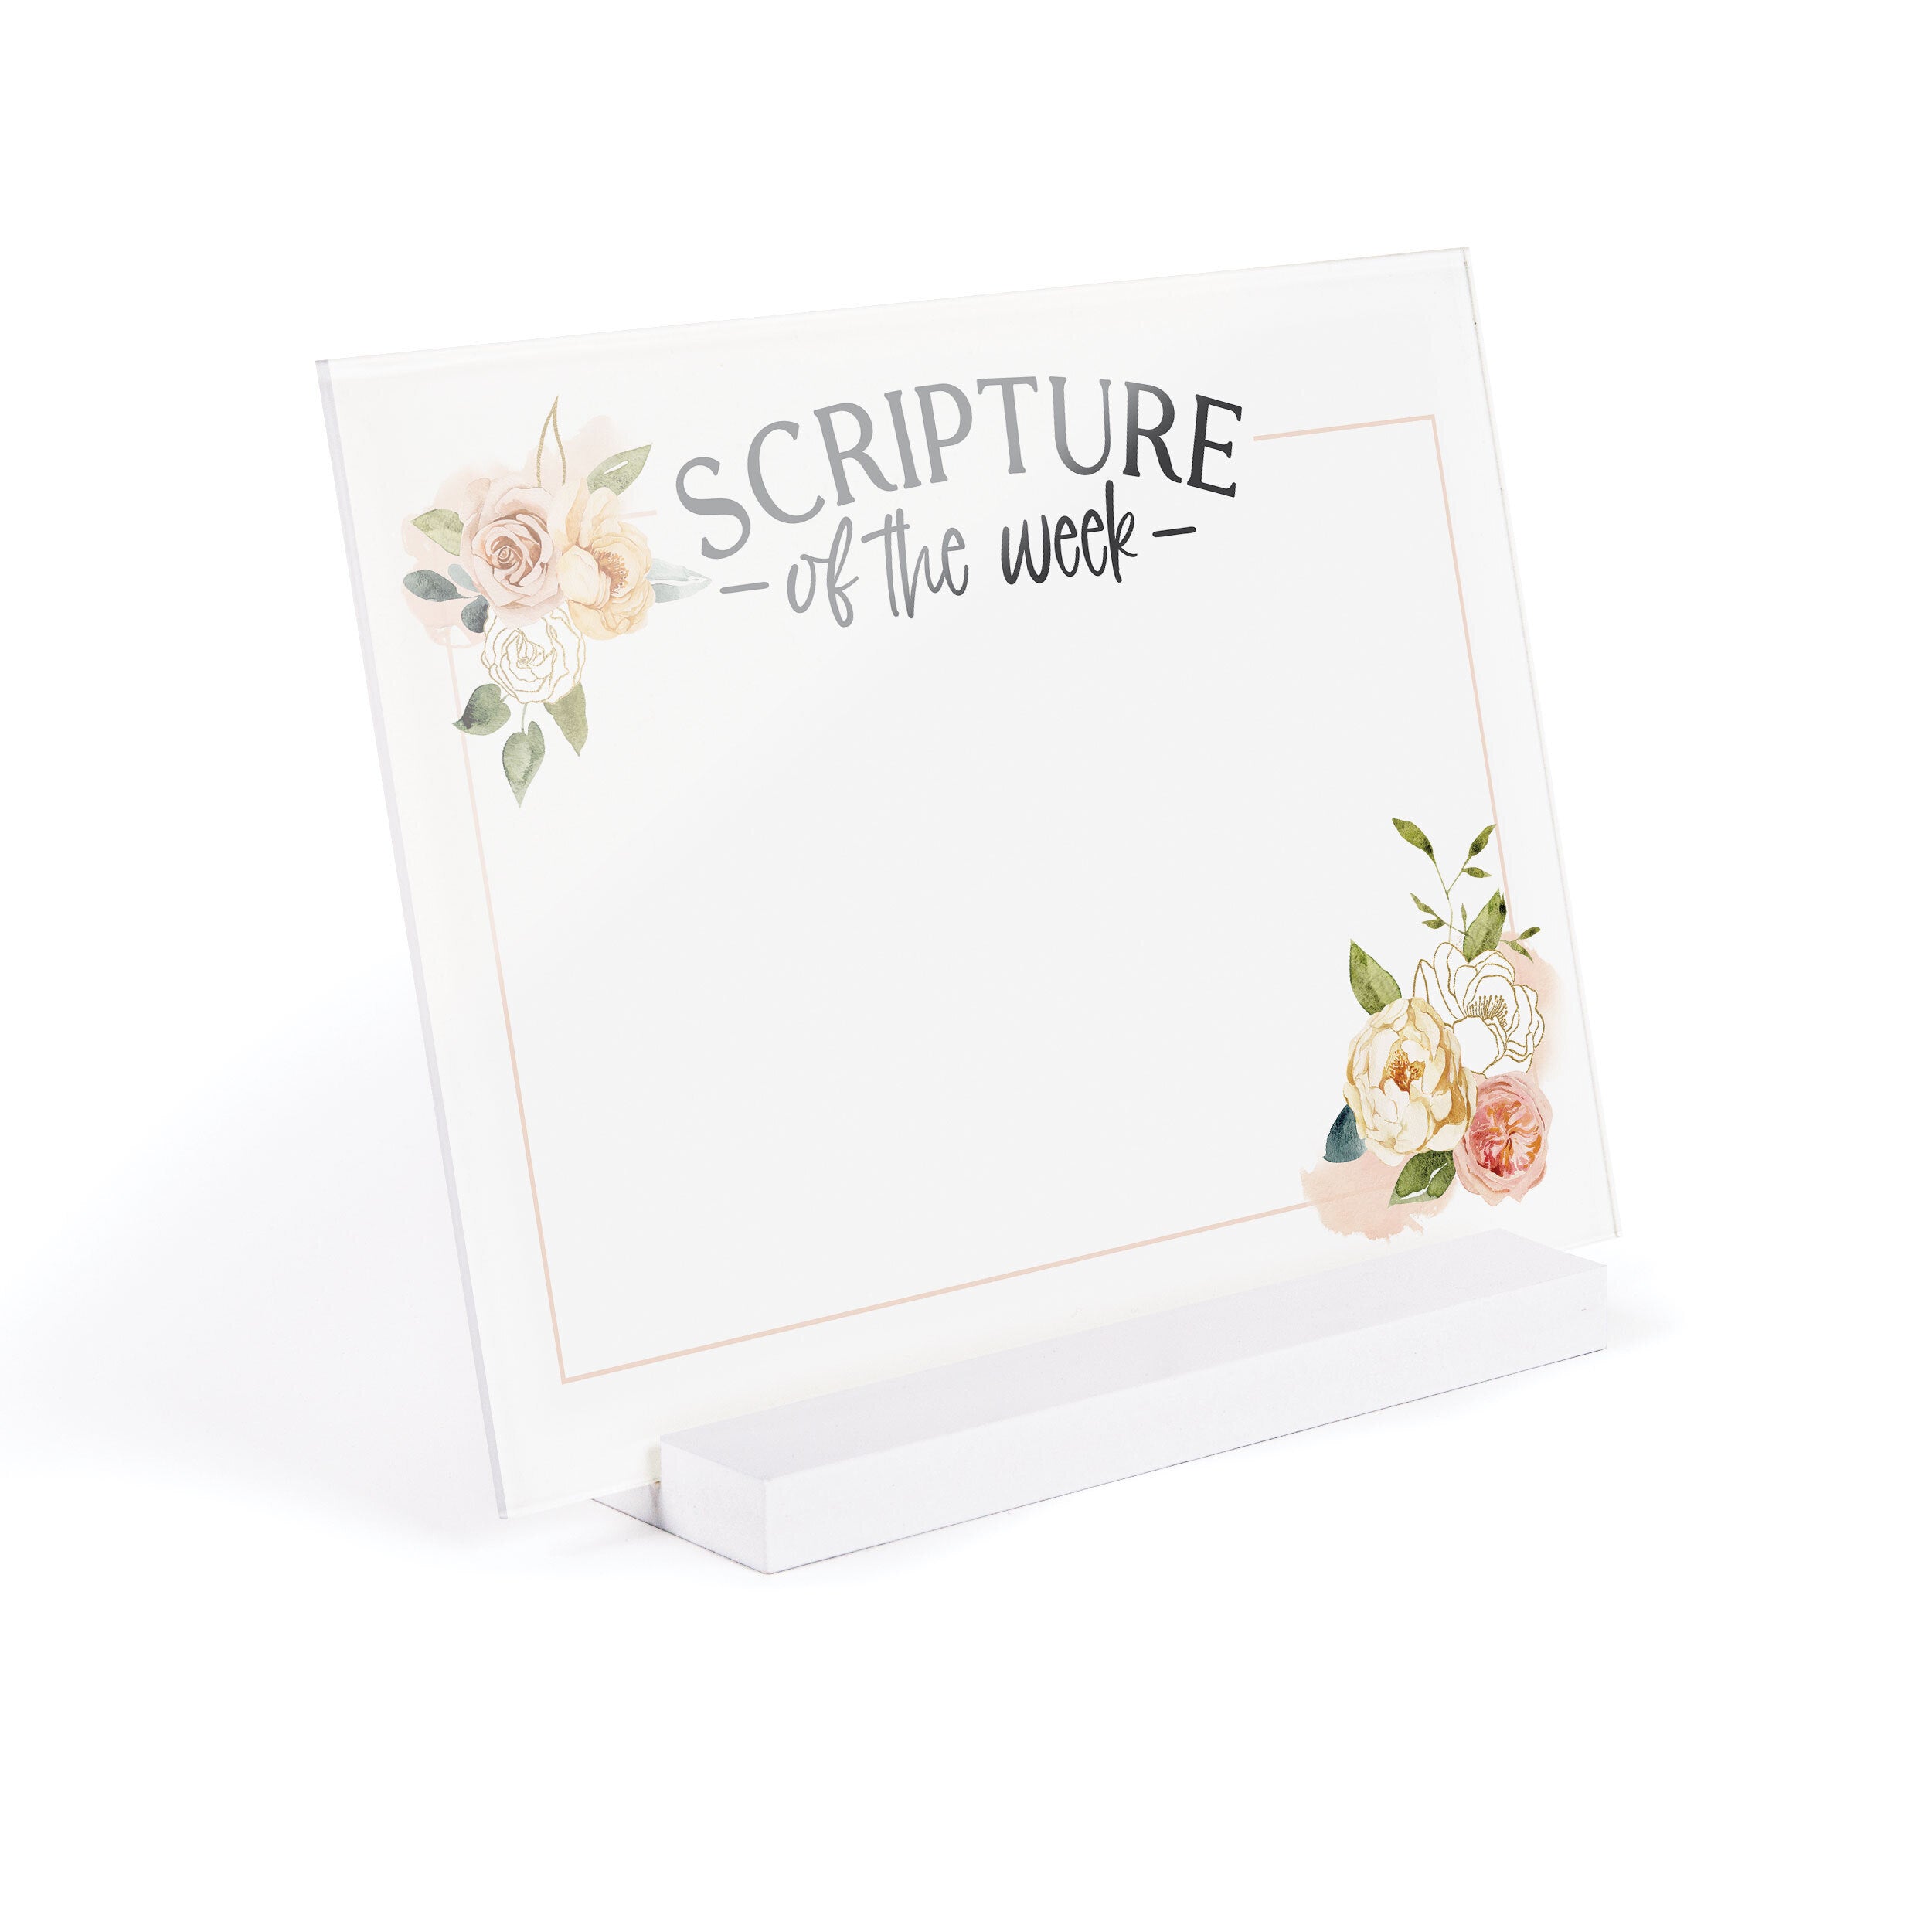 Scripture Of The Week Dry Erase Marker Board with Wooden Base